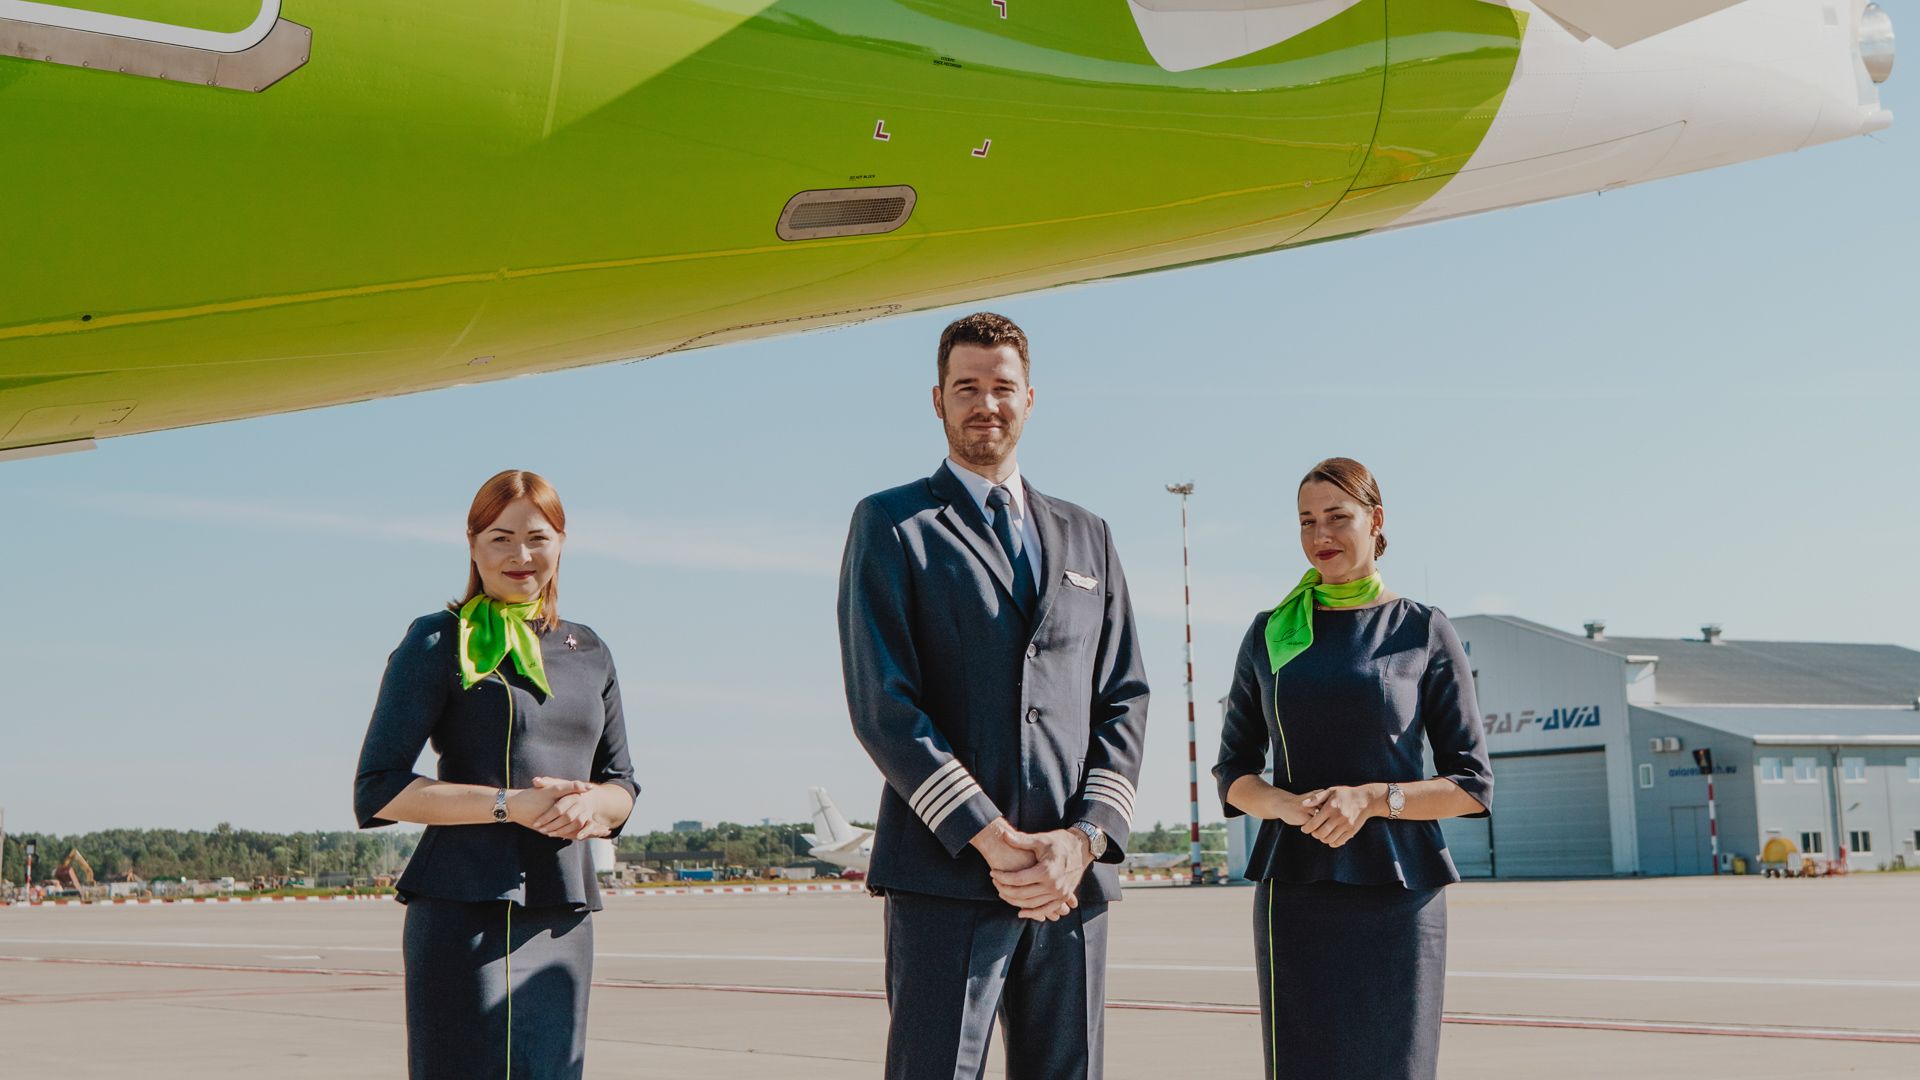 airBaltic, New Employees, Fully Vaccinated